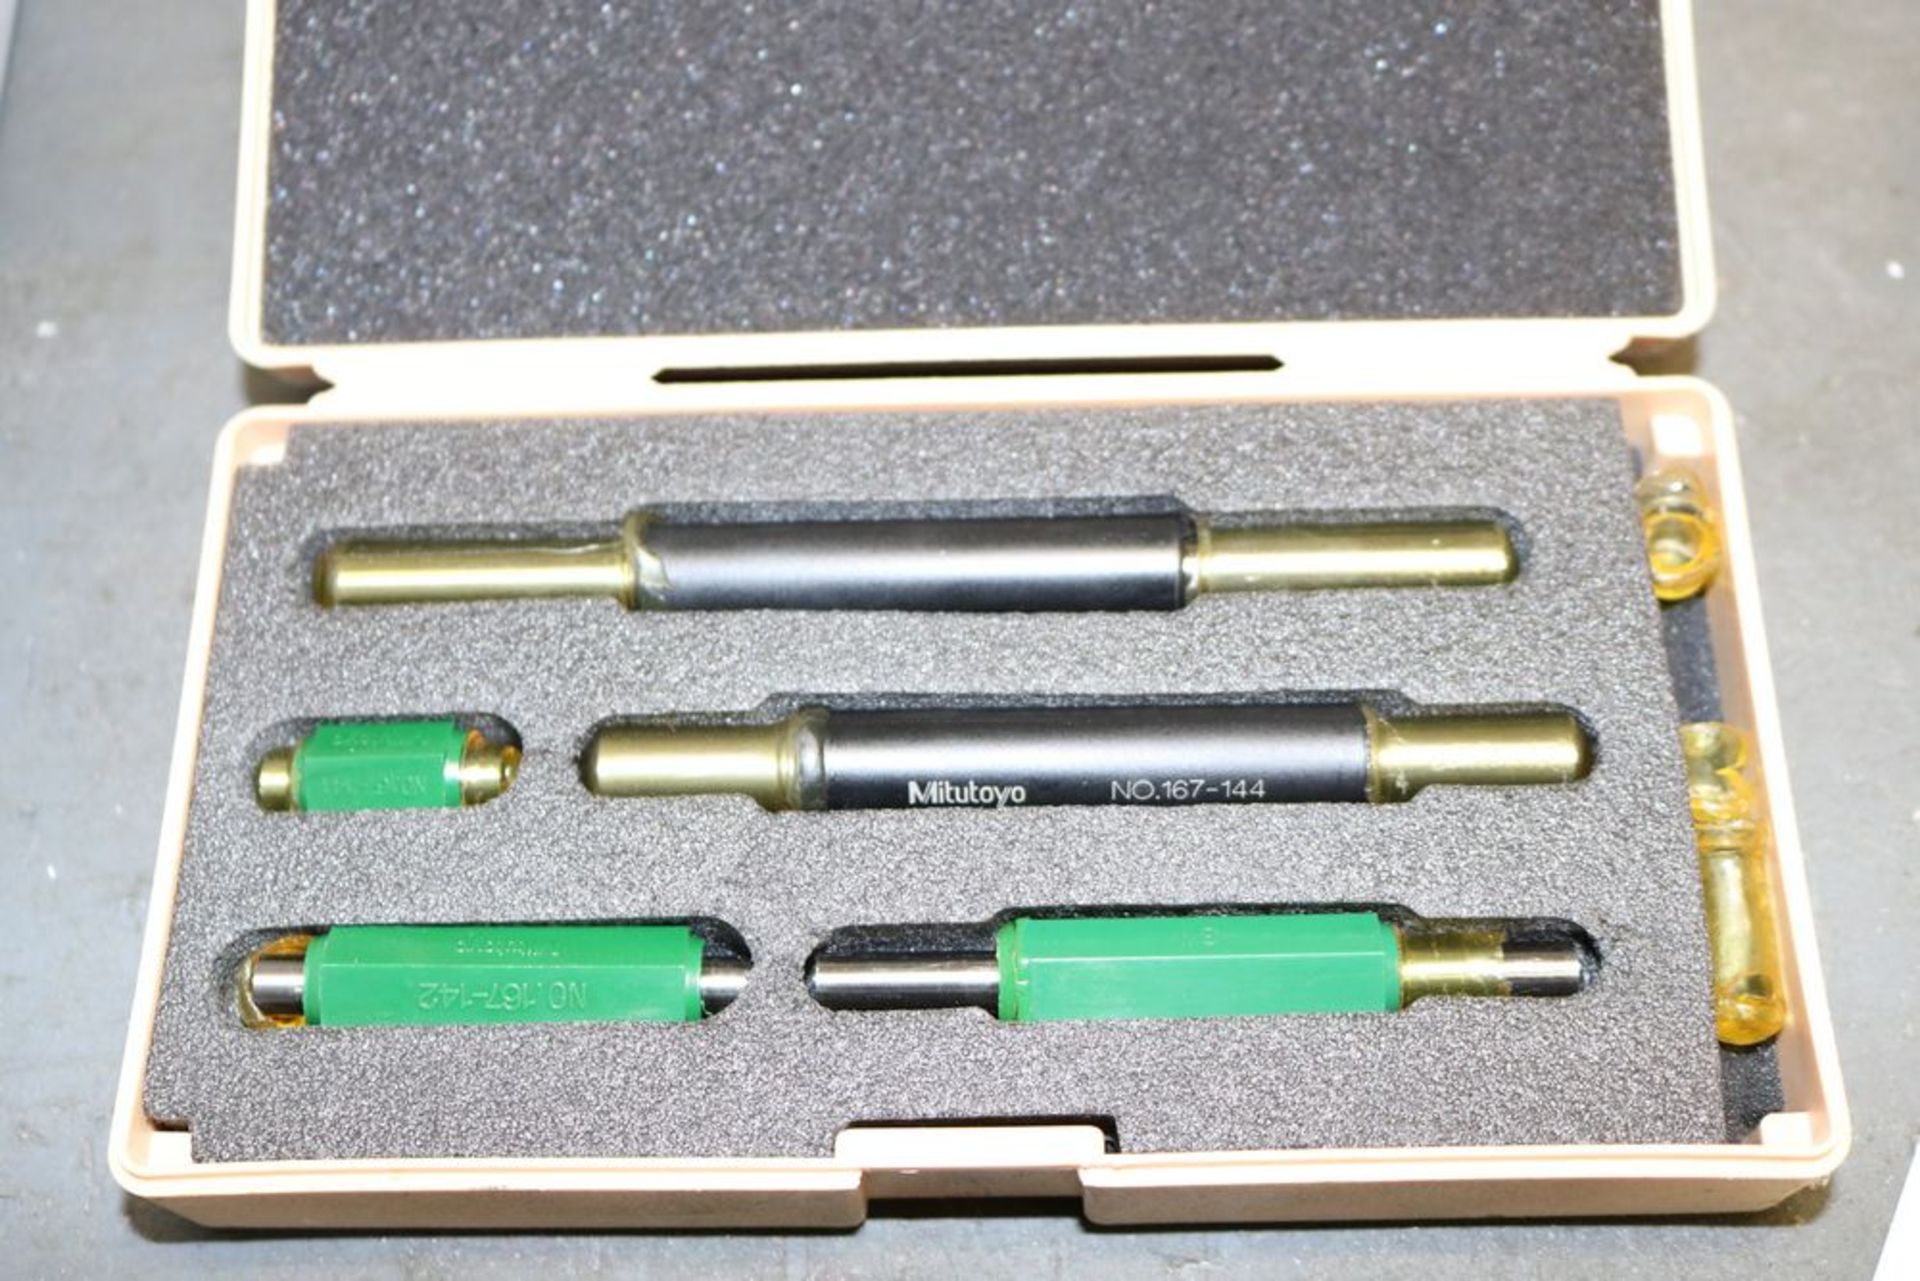 Fowler Digmic Set 0 - 1", 1 - 2", 2 - 3" with Mitutoyo 0 - 6" Standards - Image 4 of 4